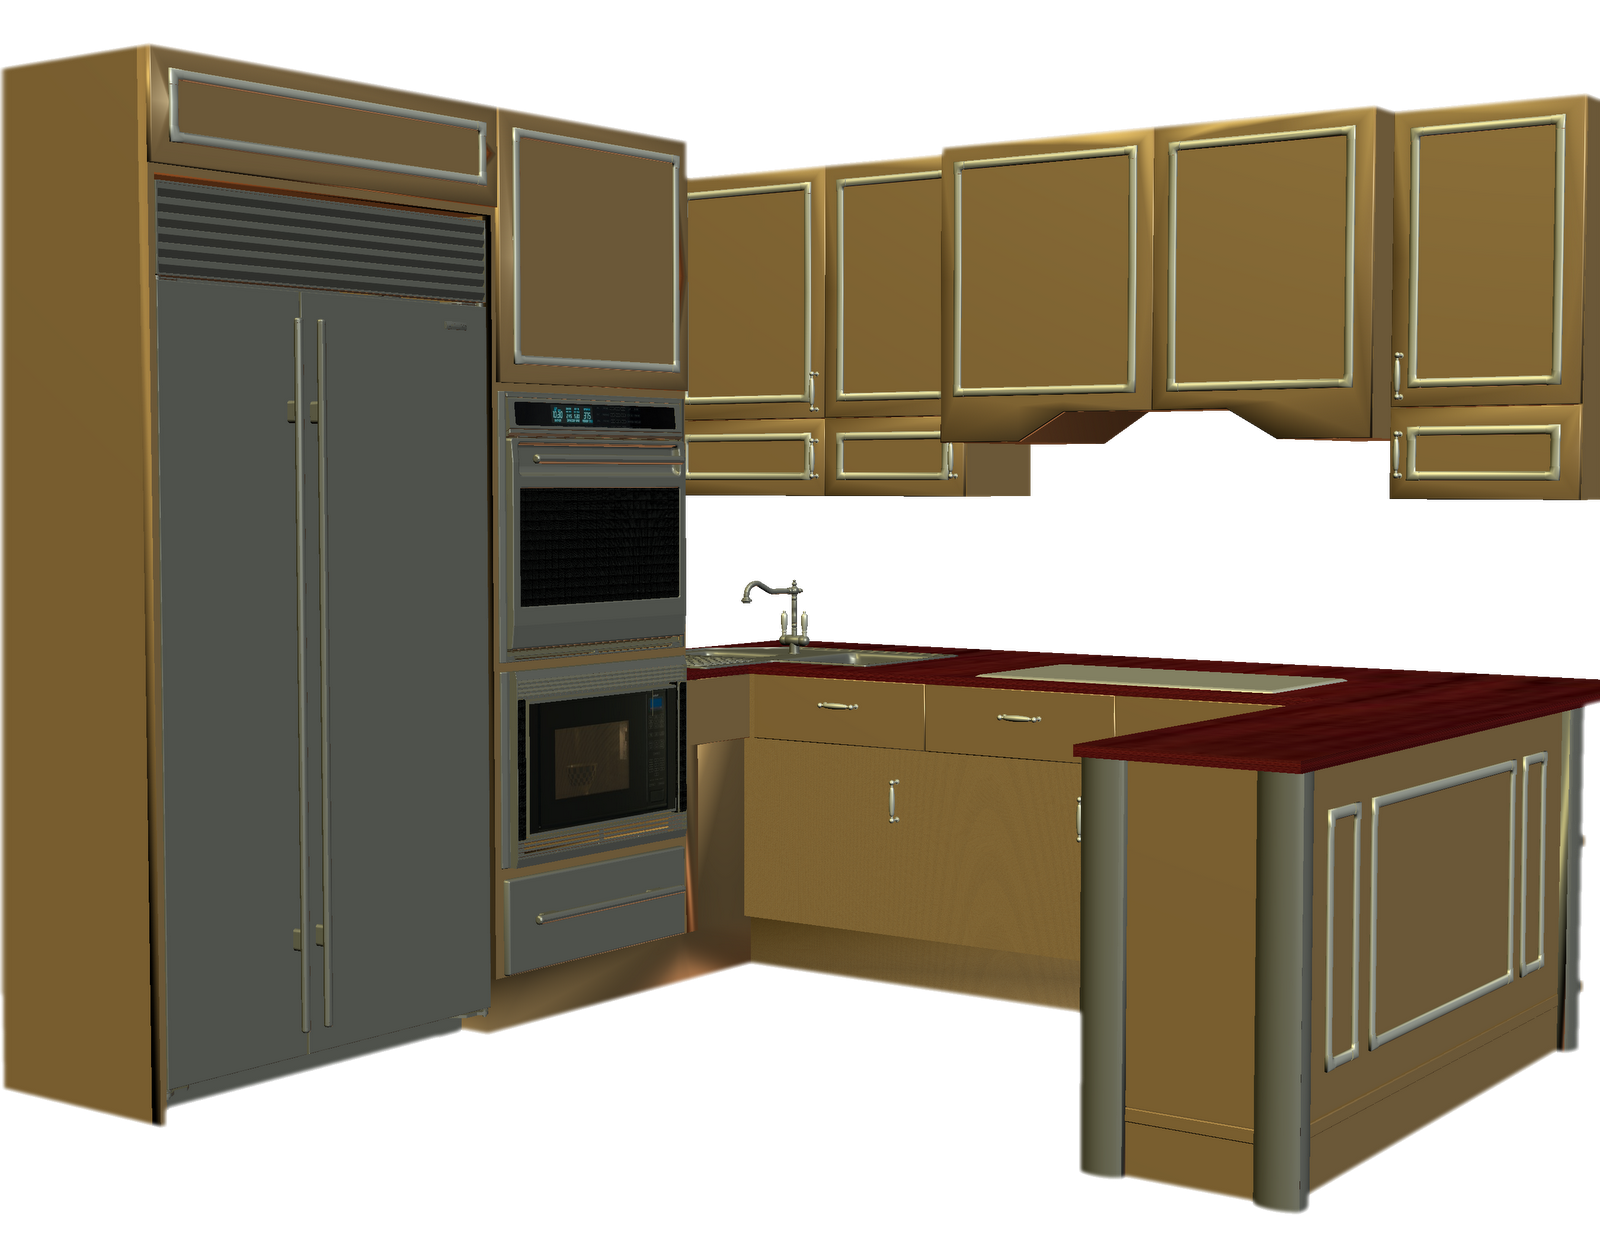 Here Are Some Pretty Cool Kitchen And Kitchen Object Clipart Enjoy